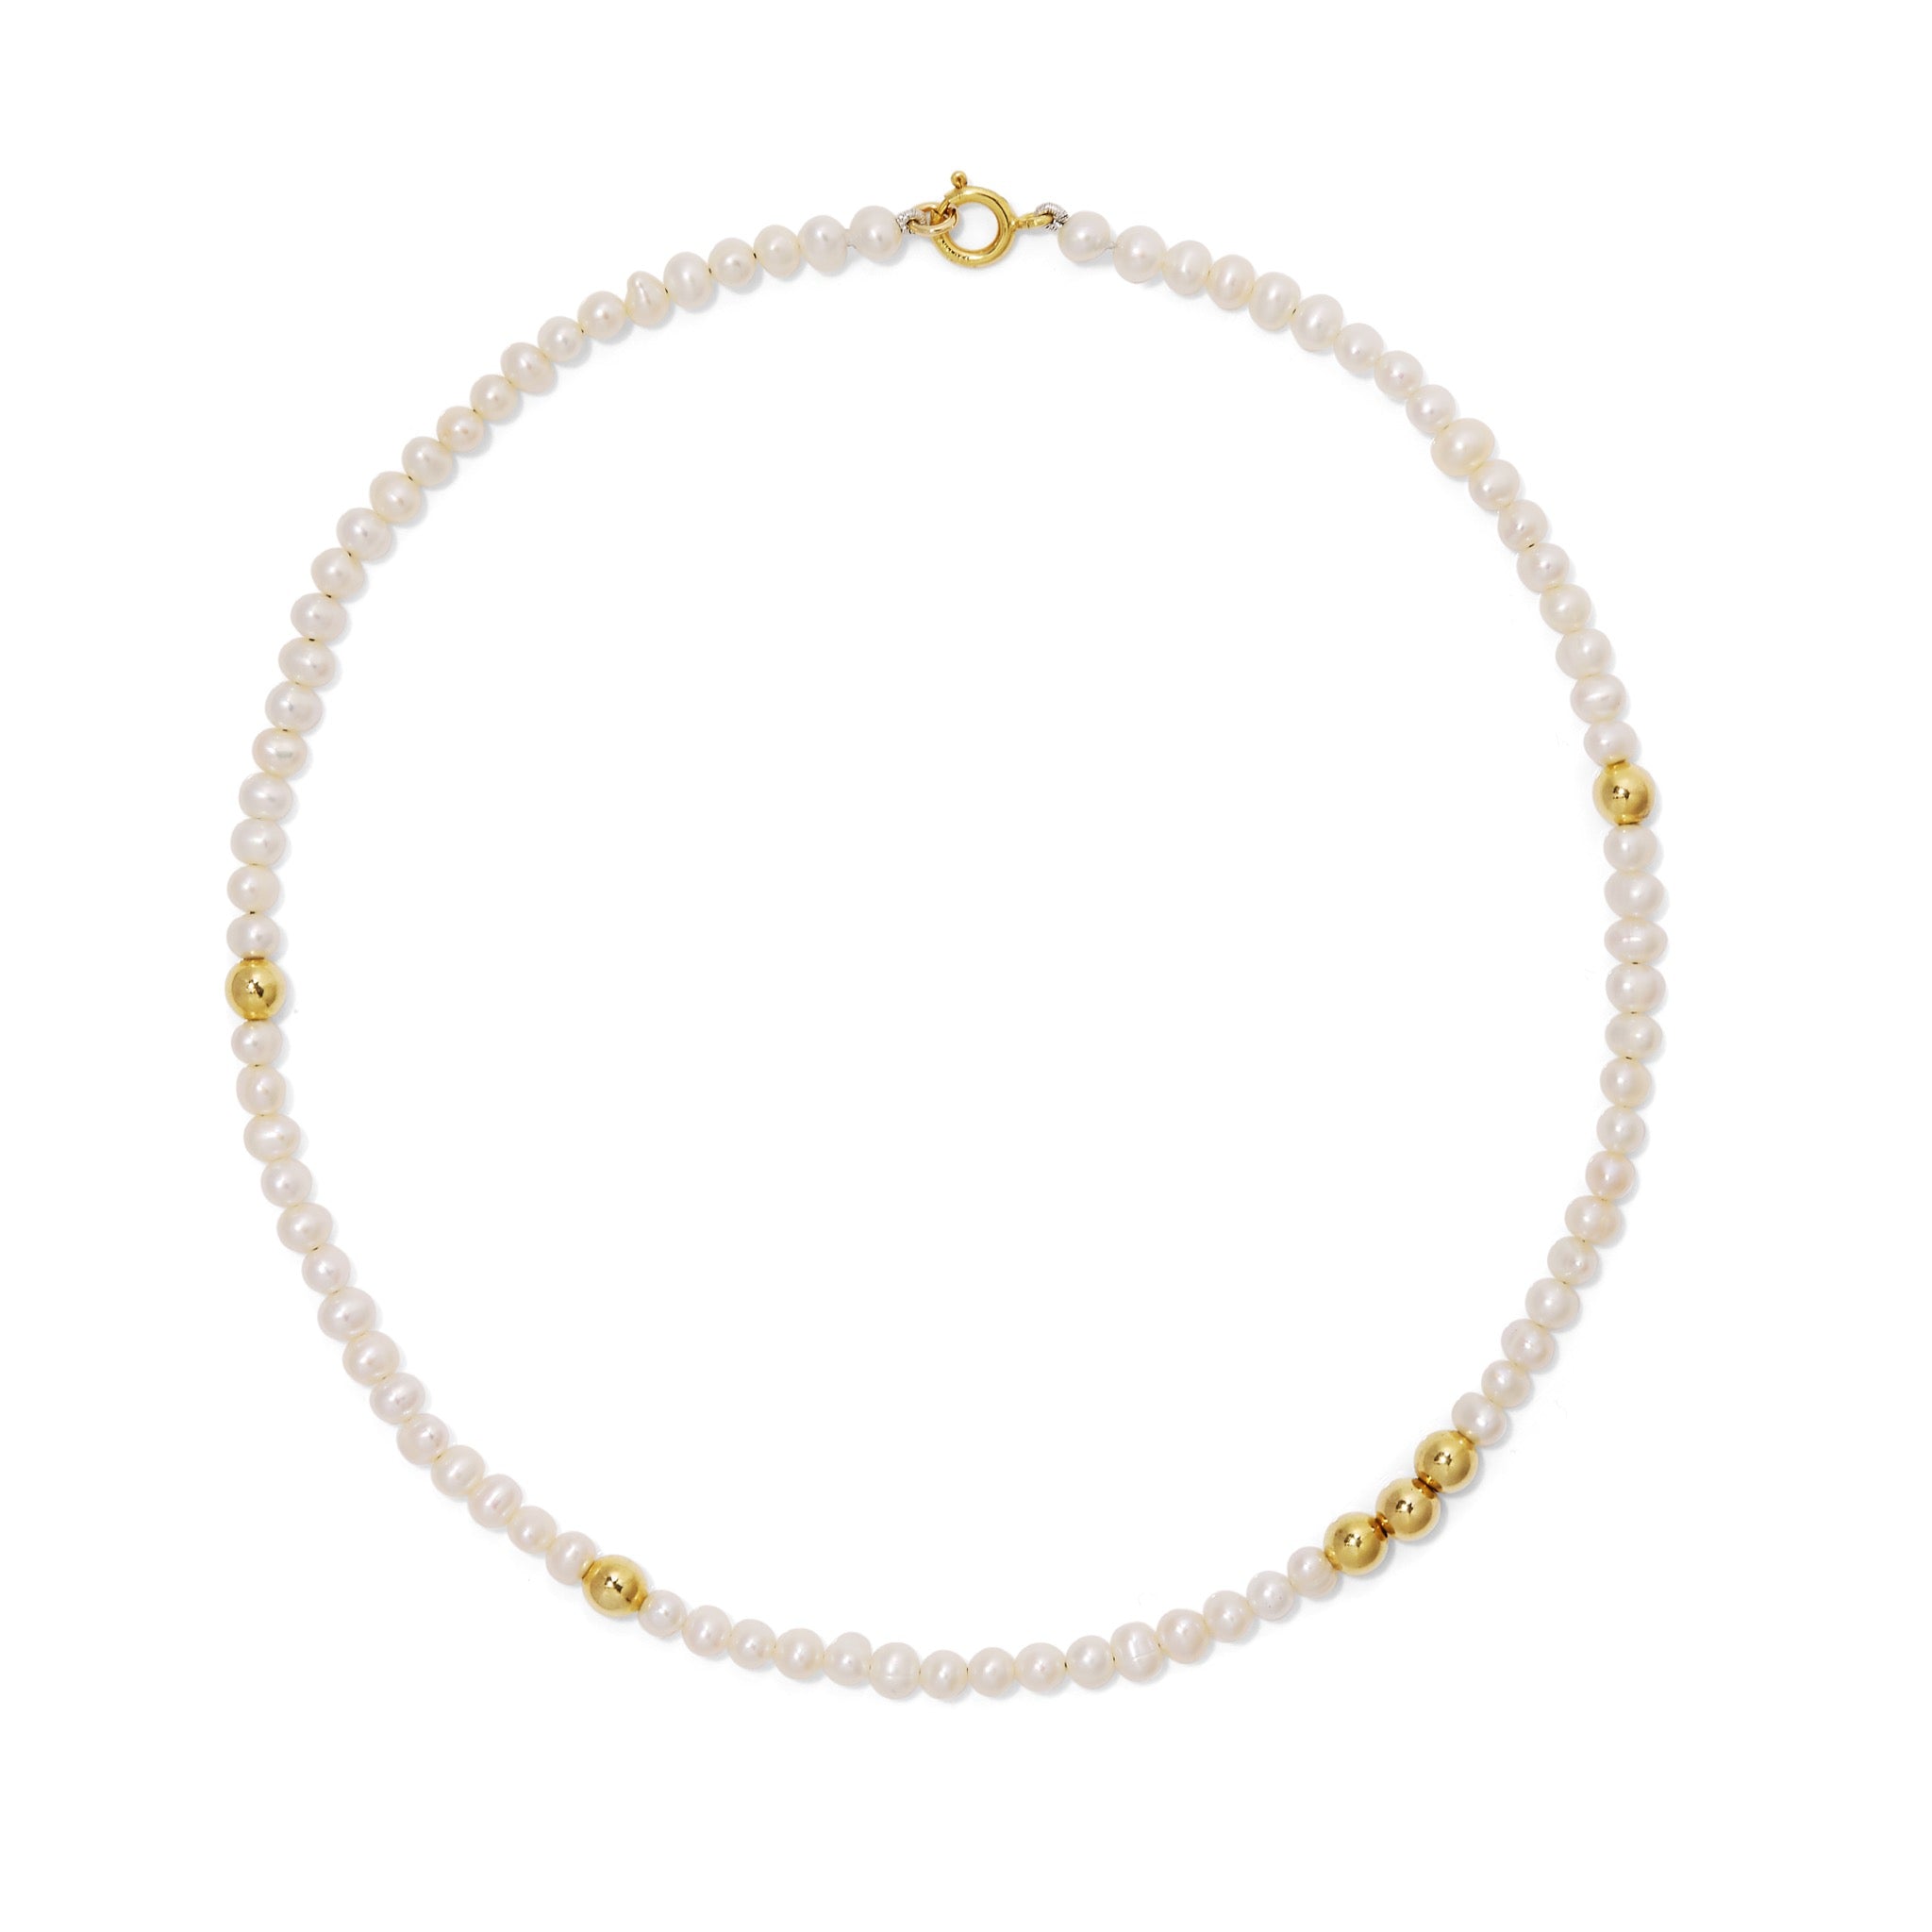 Grace Pearl and Gold bead necklace lying on white background